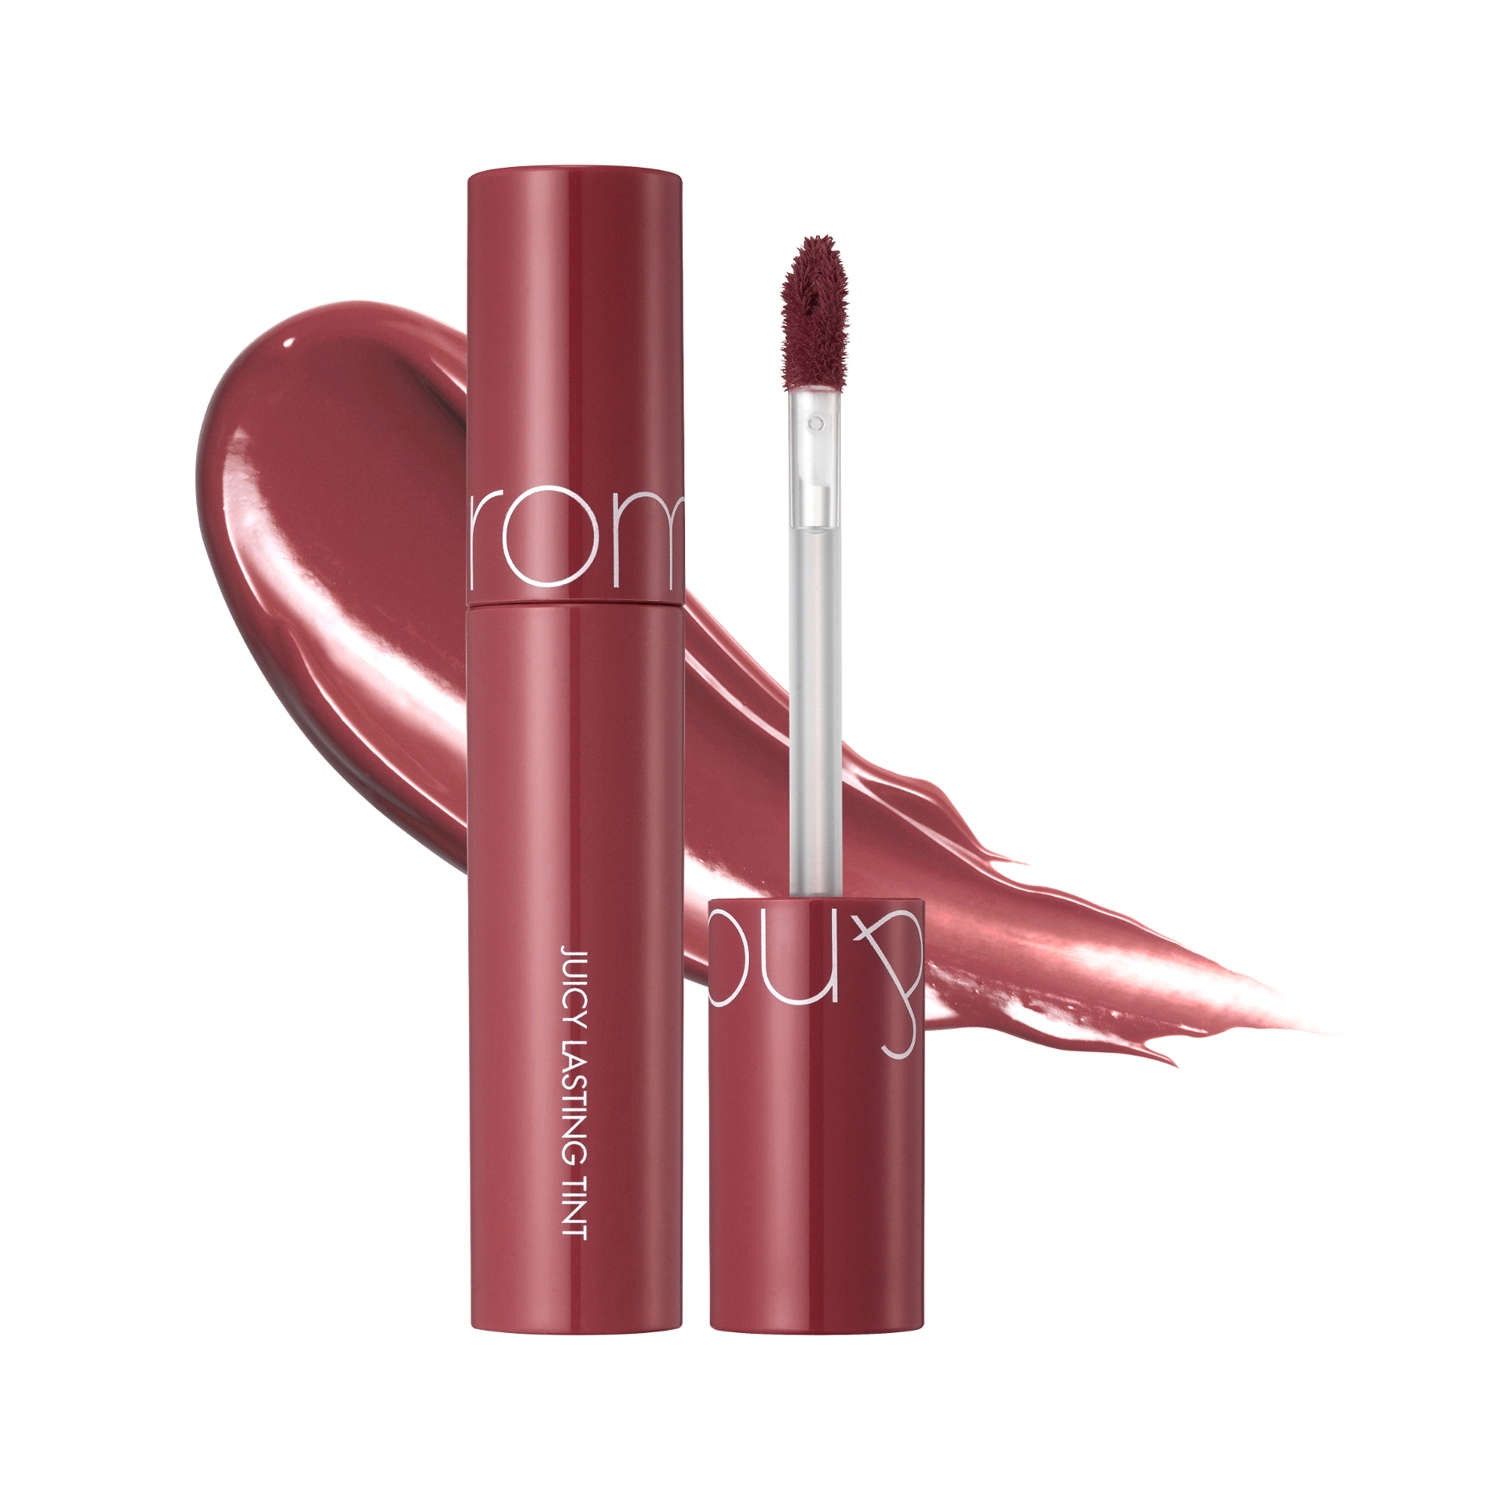 Rom&nd | Rom&nd Juicy Lasting Tint - 19 Almond Rose (5.5g)